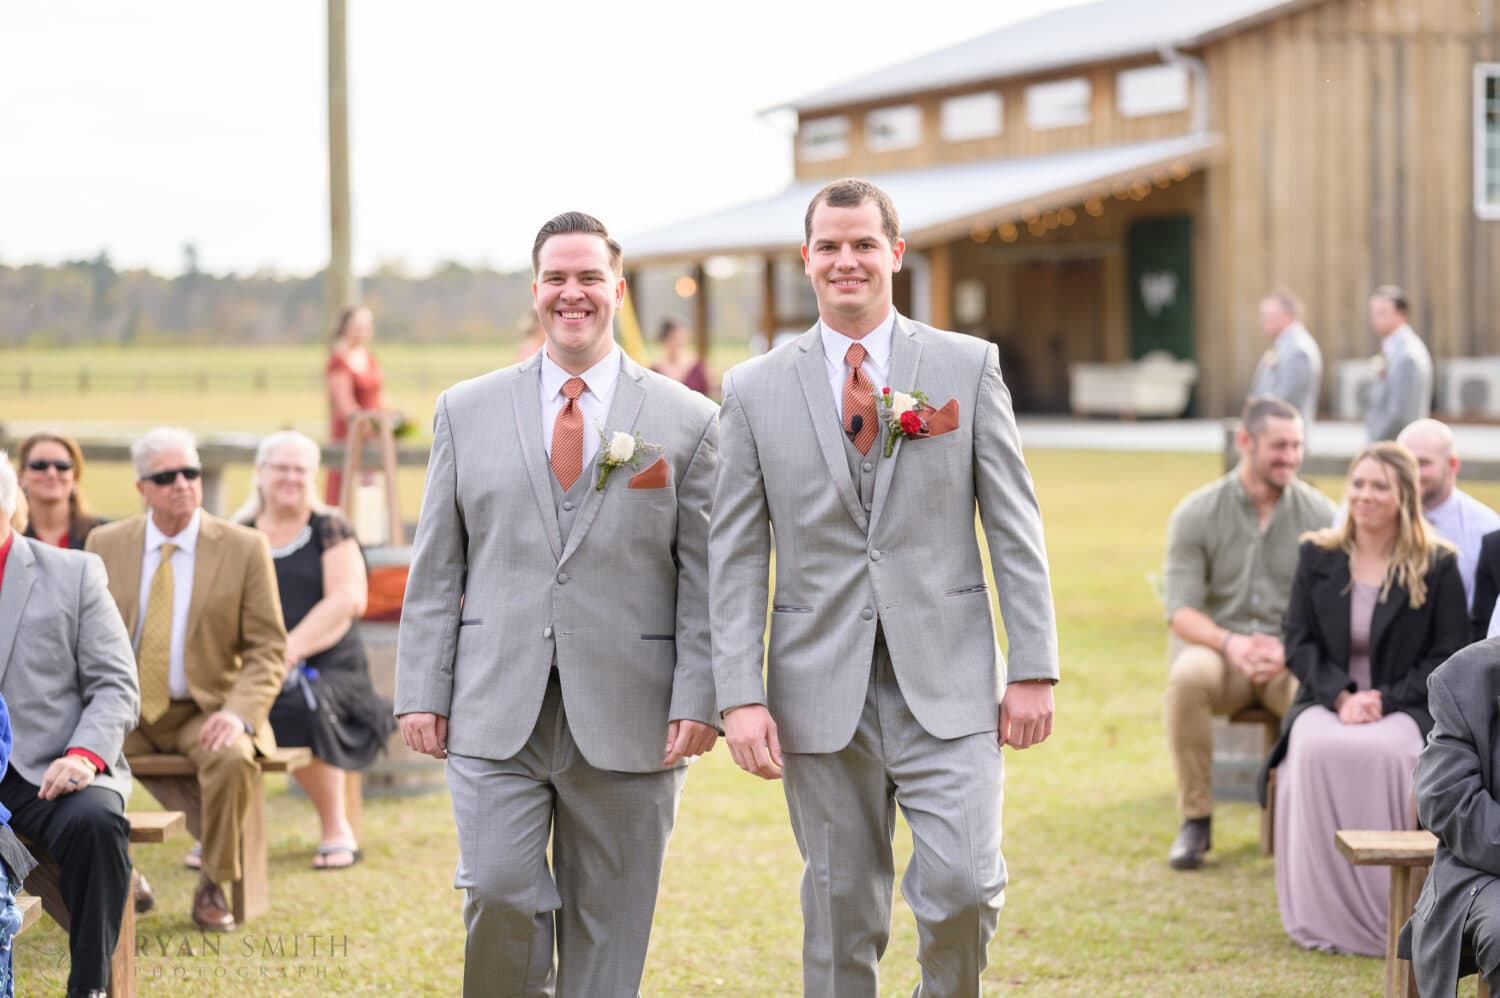 Groom and brother walking together - The Blessed Barn